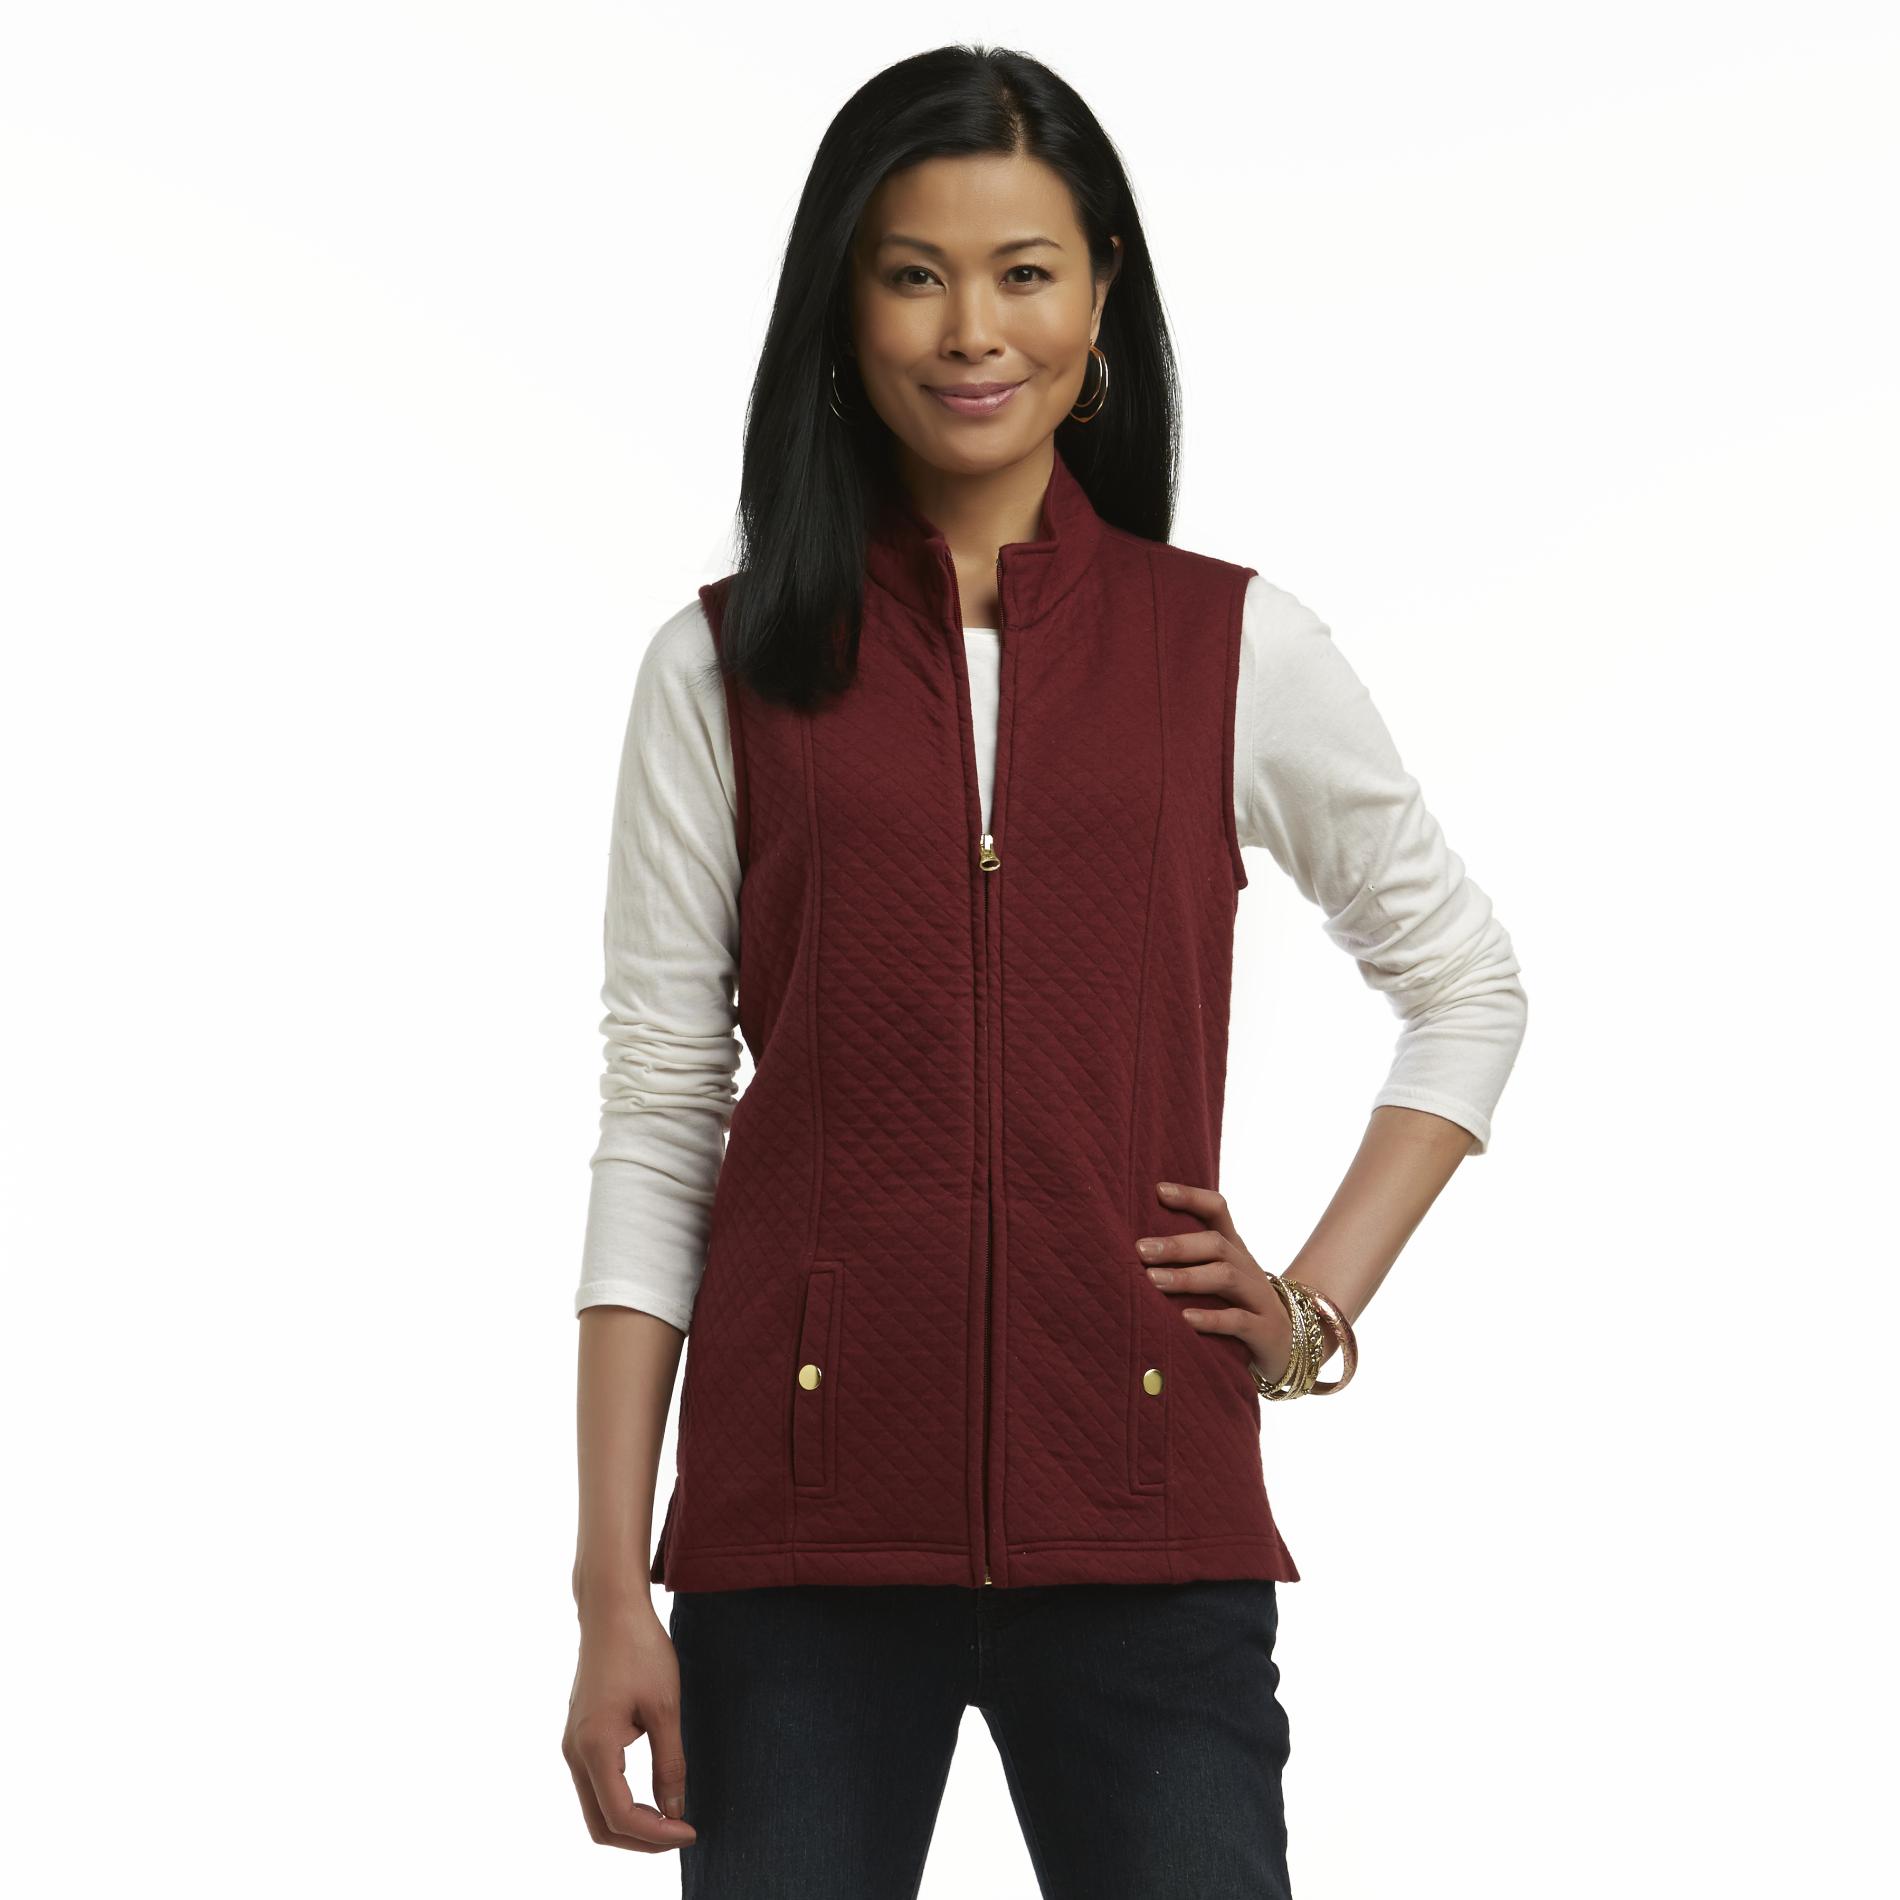 Basic Editions Women's Quilted Knit Vest